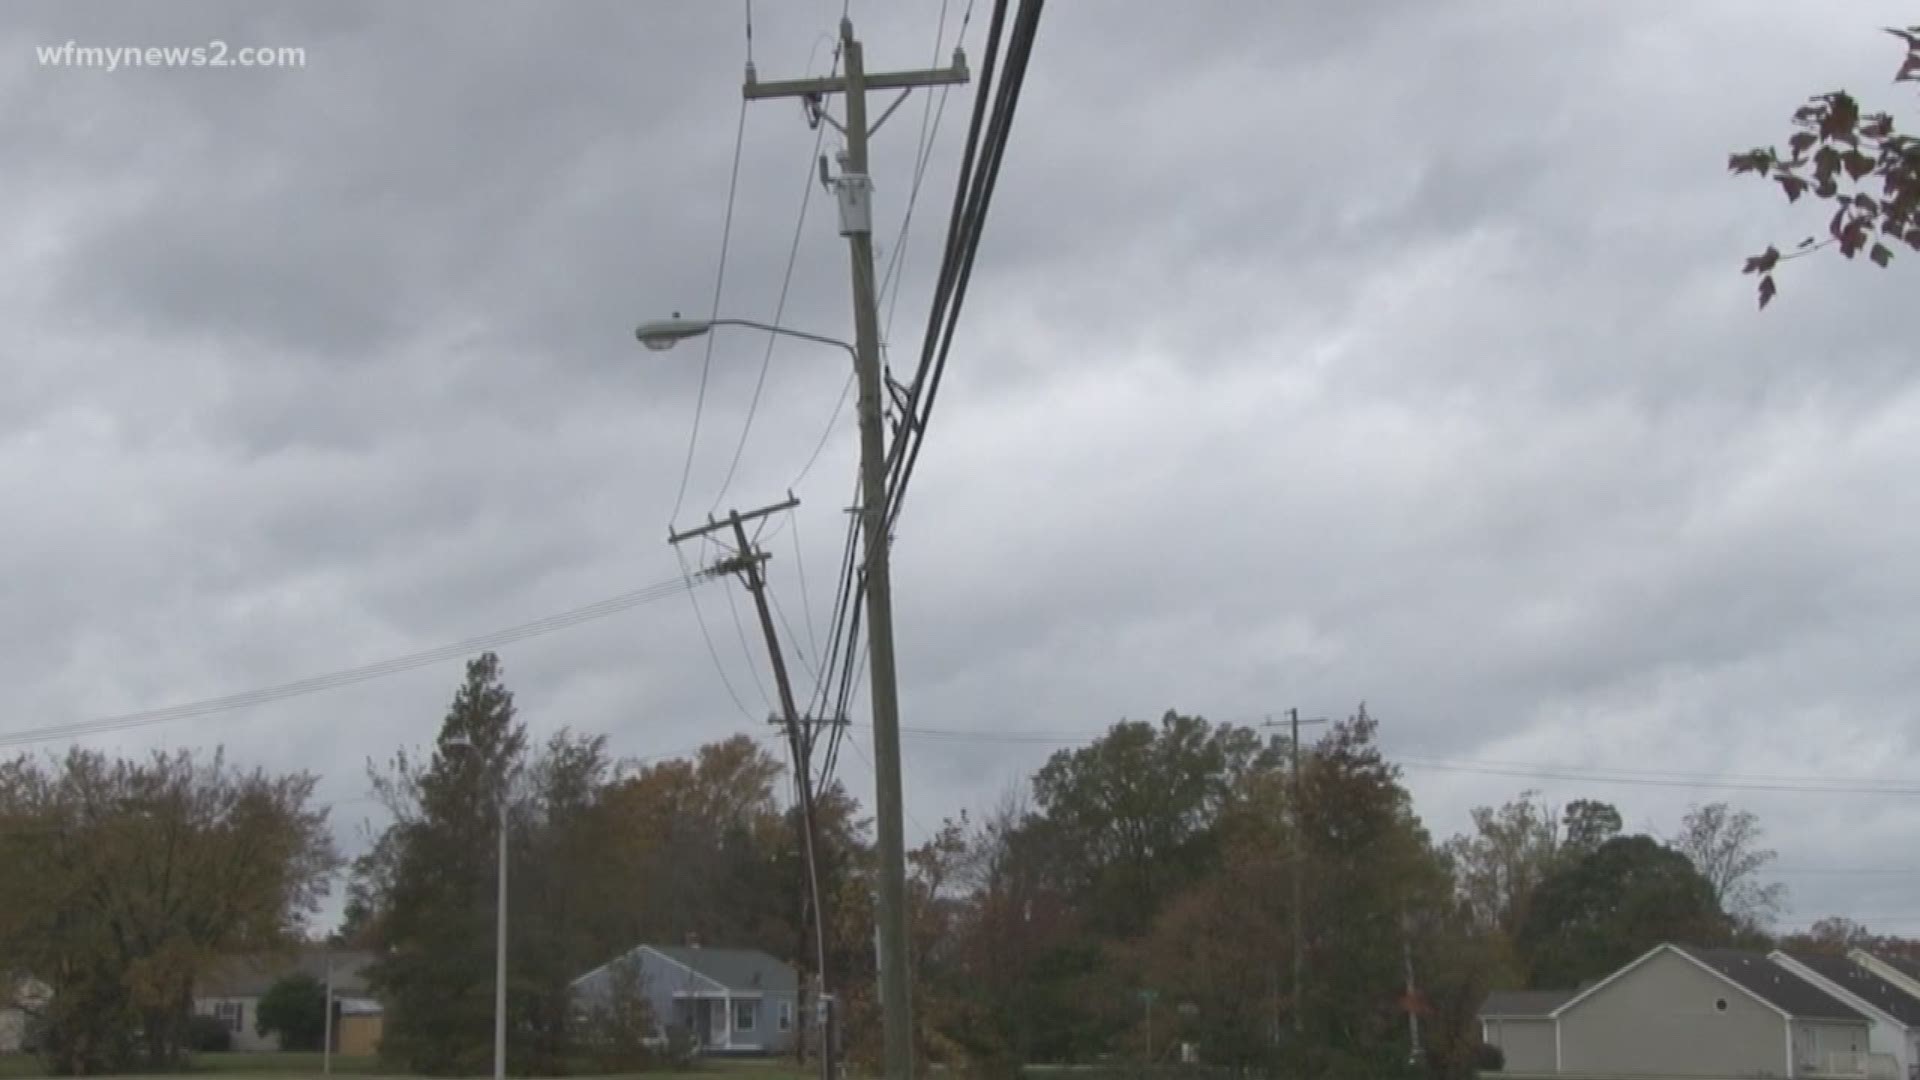 Duke Energy has more than 4 million power poles between North and South Carolina so they can't inspect every single pole, which is why the rely on the public to report any poles they are worried about.